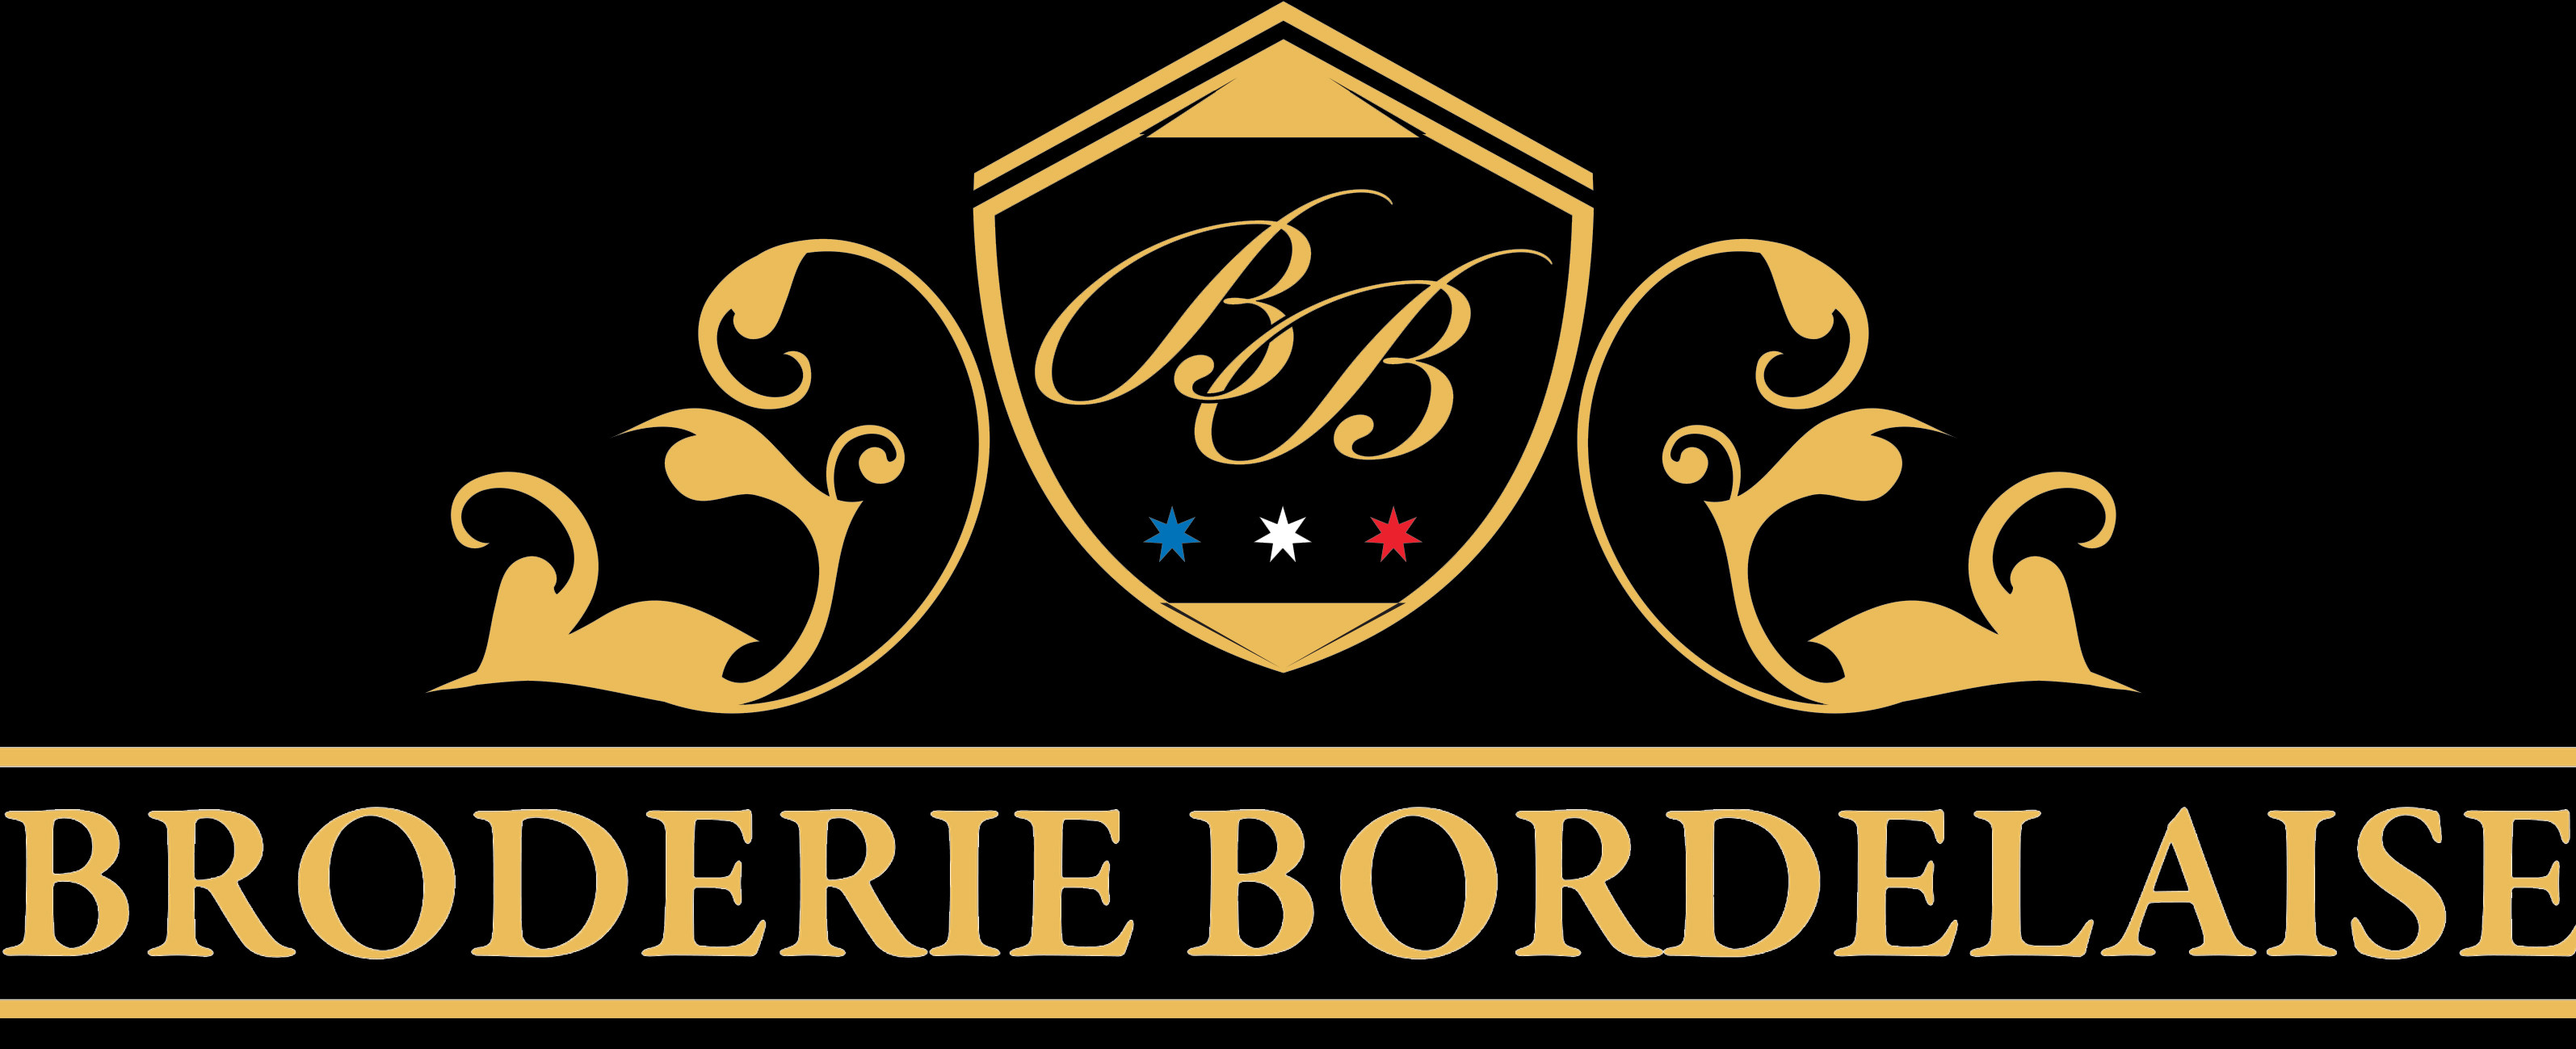 broderie boutique